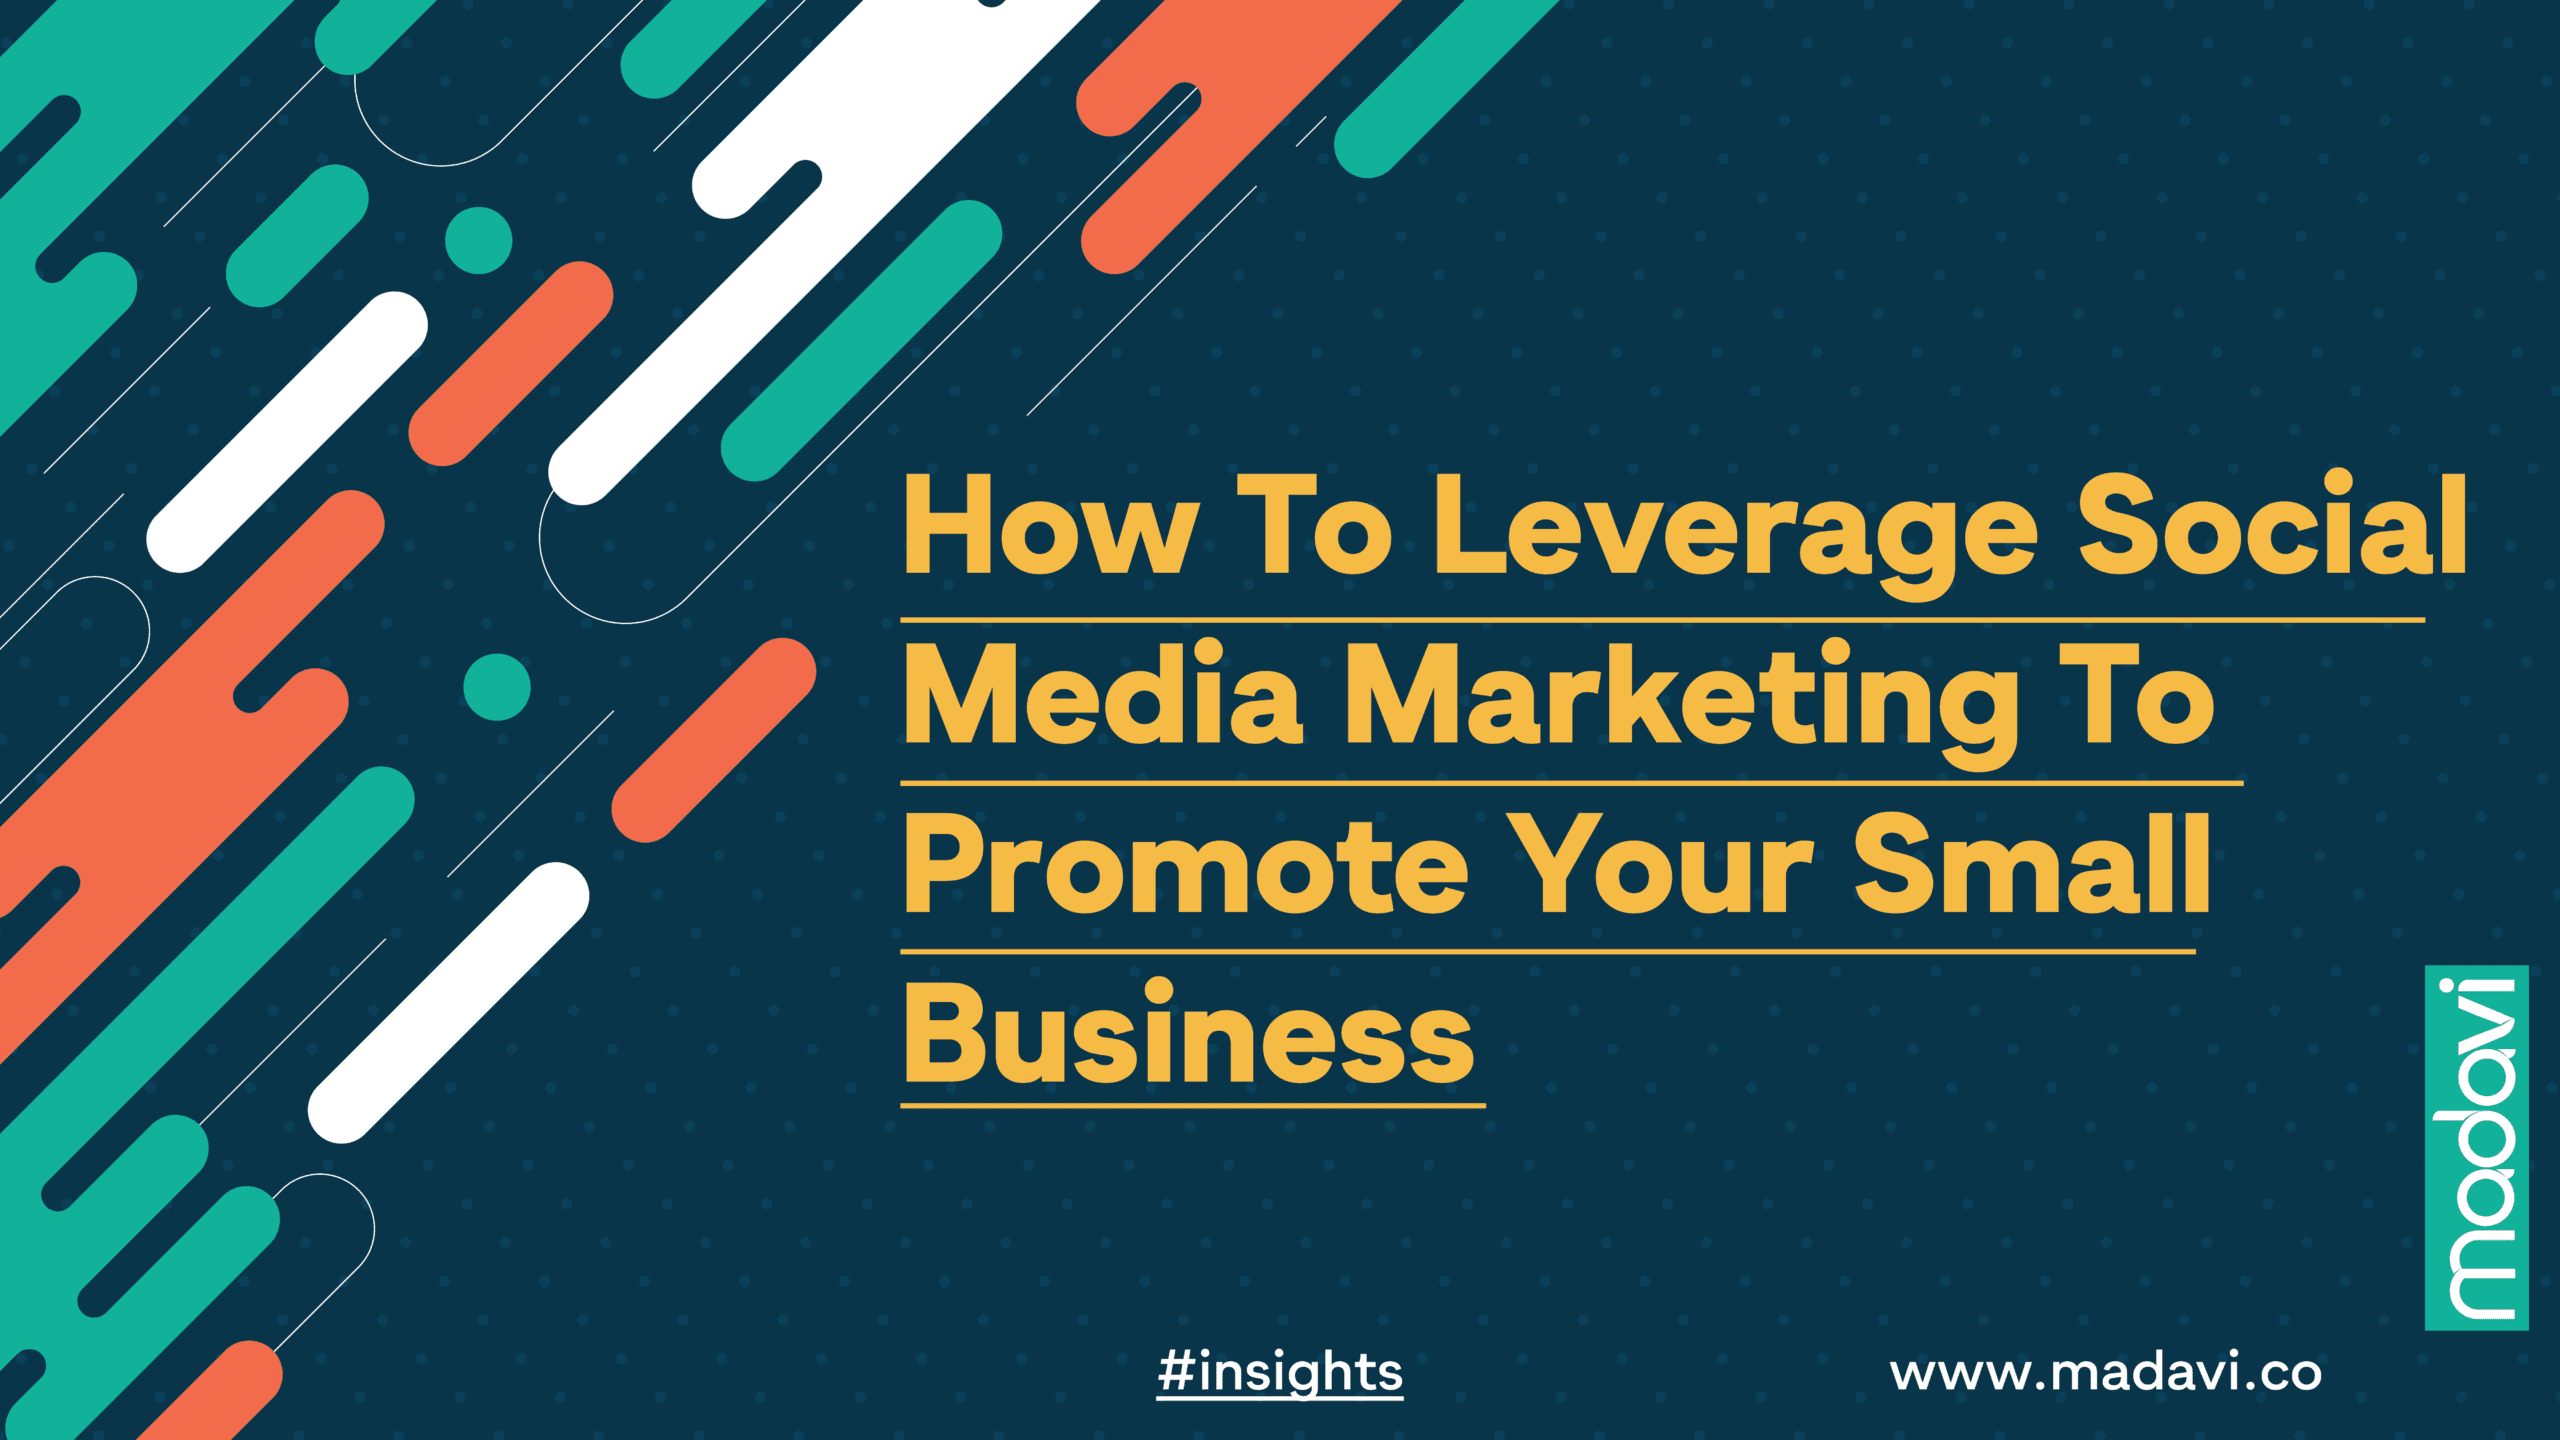 How go leverage social media marketing to promote your small business 01